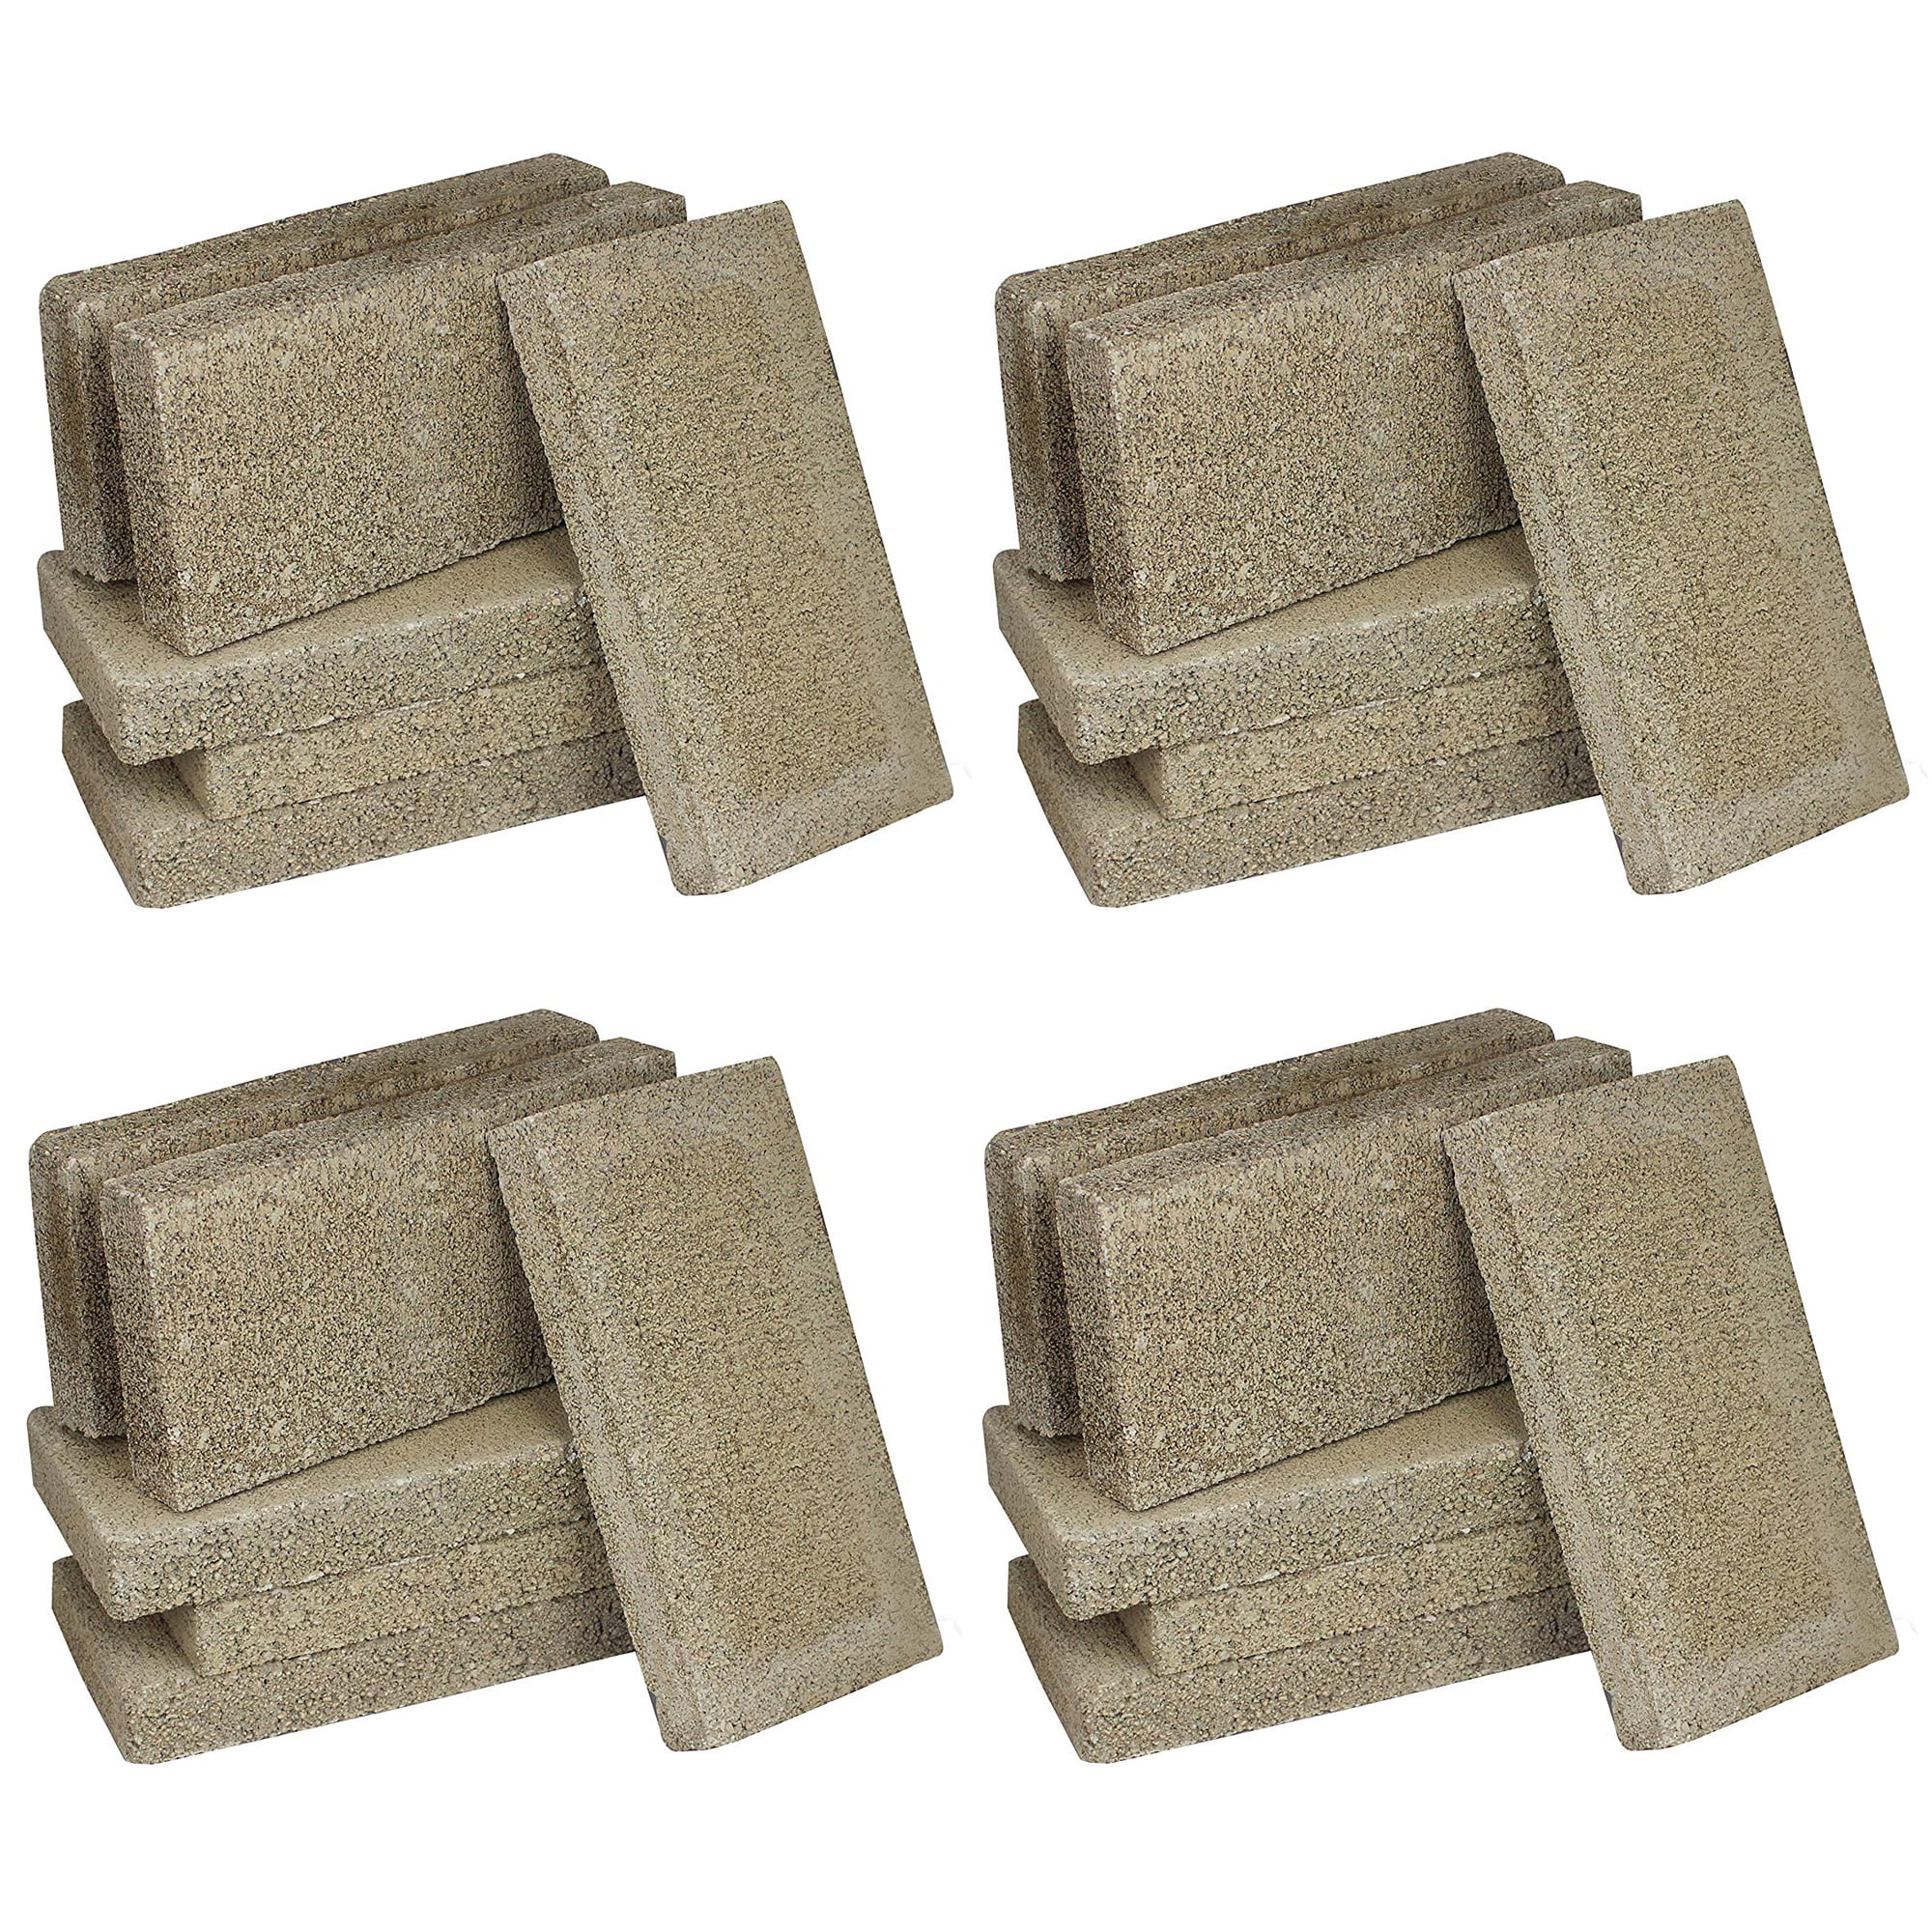 Fire Bricks for Hunter Stove Fire Bricks Pack of 4 9" x 4.5" x 1" thick 